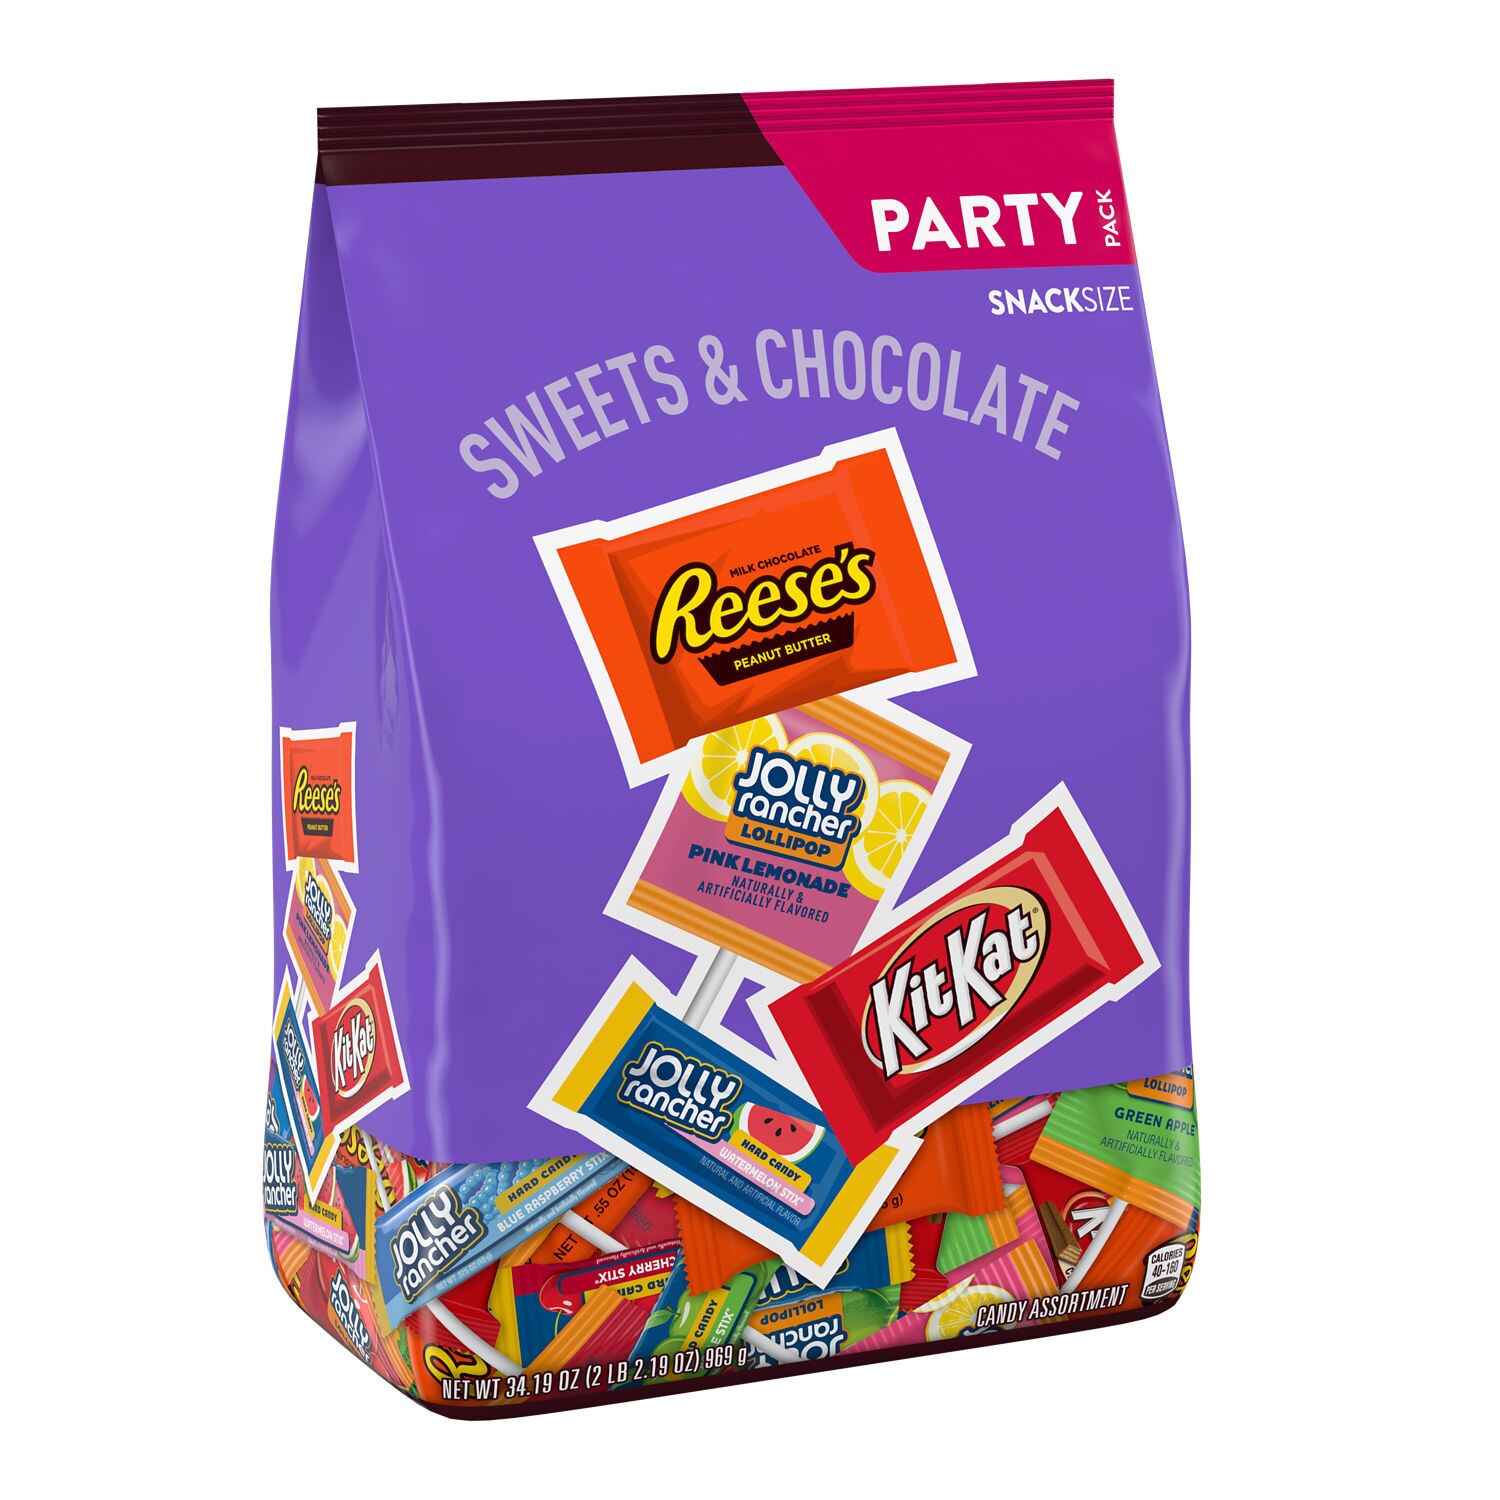 Reese's, Kit Kat And Jolly Rancher Sweets & Chocolate Assortment Snack Size Candy, 34.19 OZ